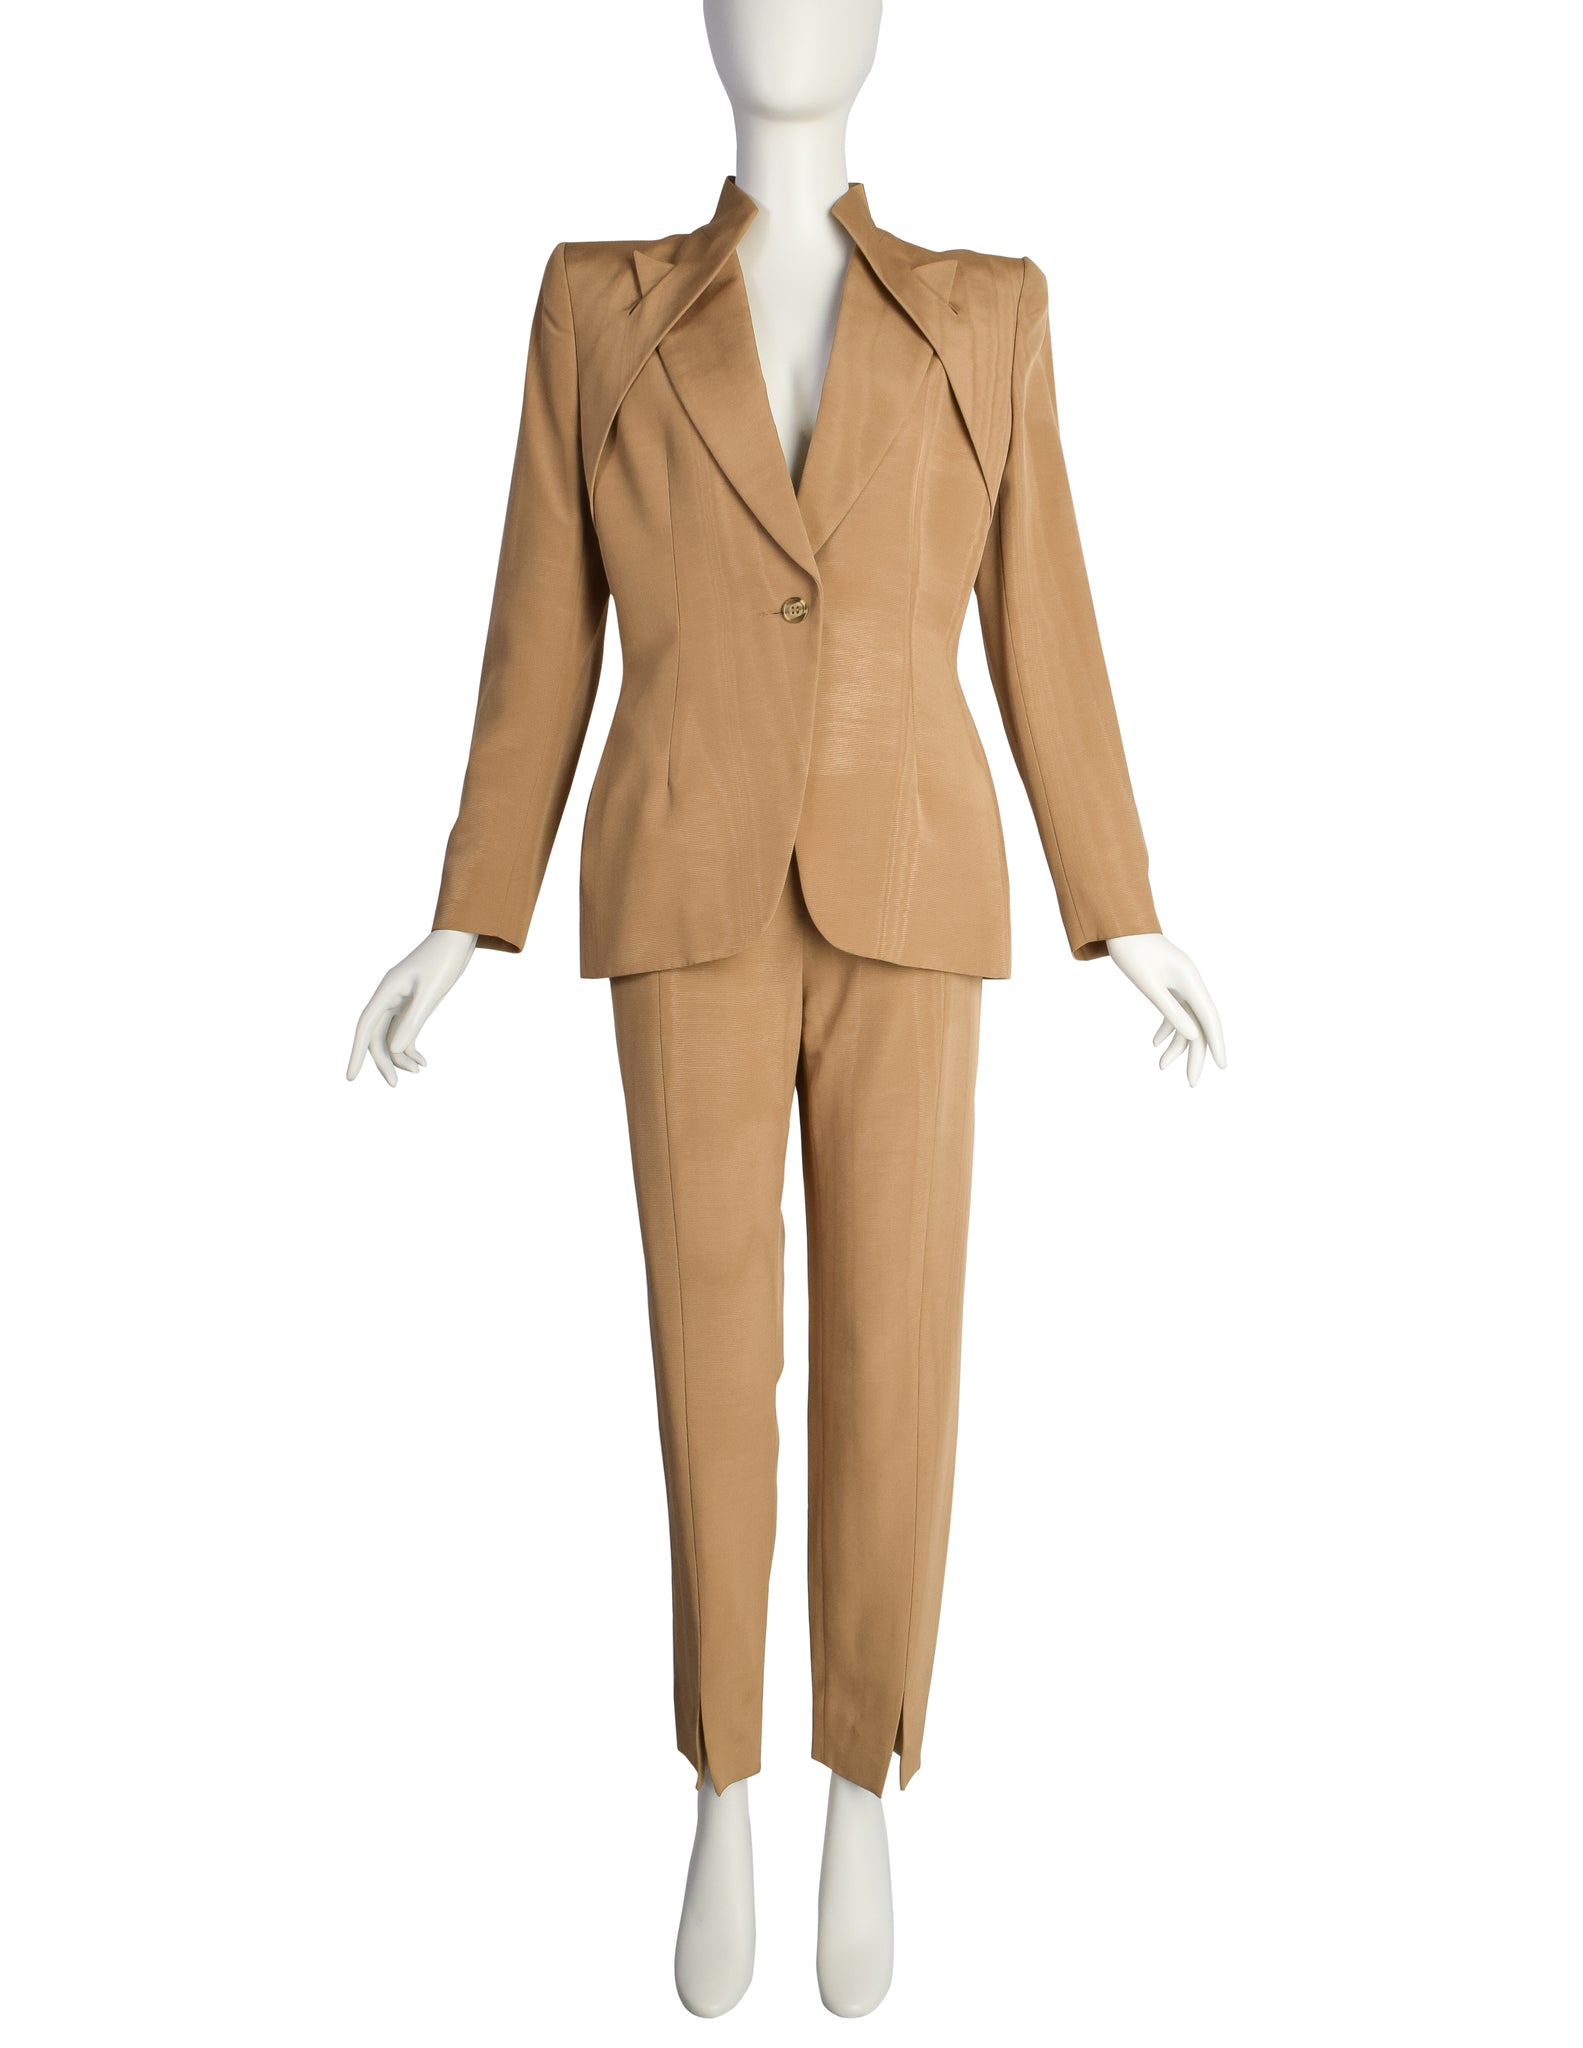 Givenchy Couture by Alexander McQueen Vintage AW 1997 Ribbed Moire Jacket Pant Suit